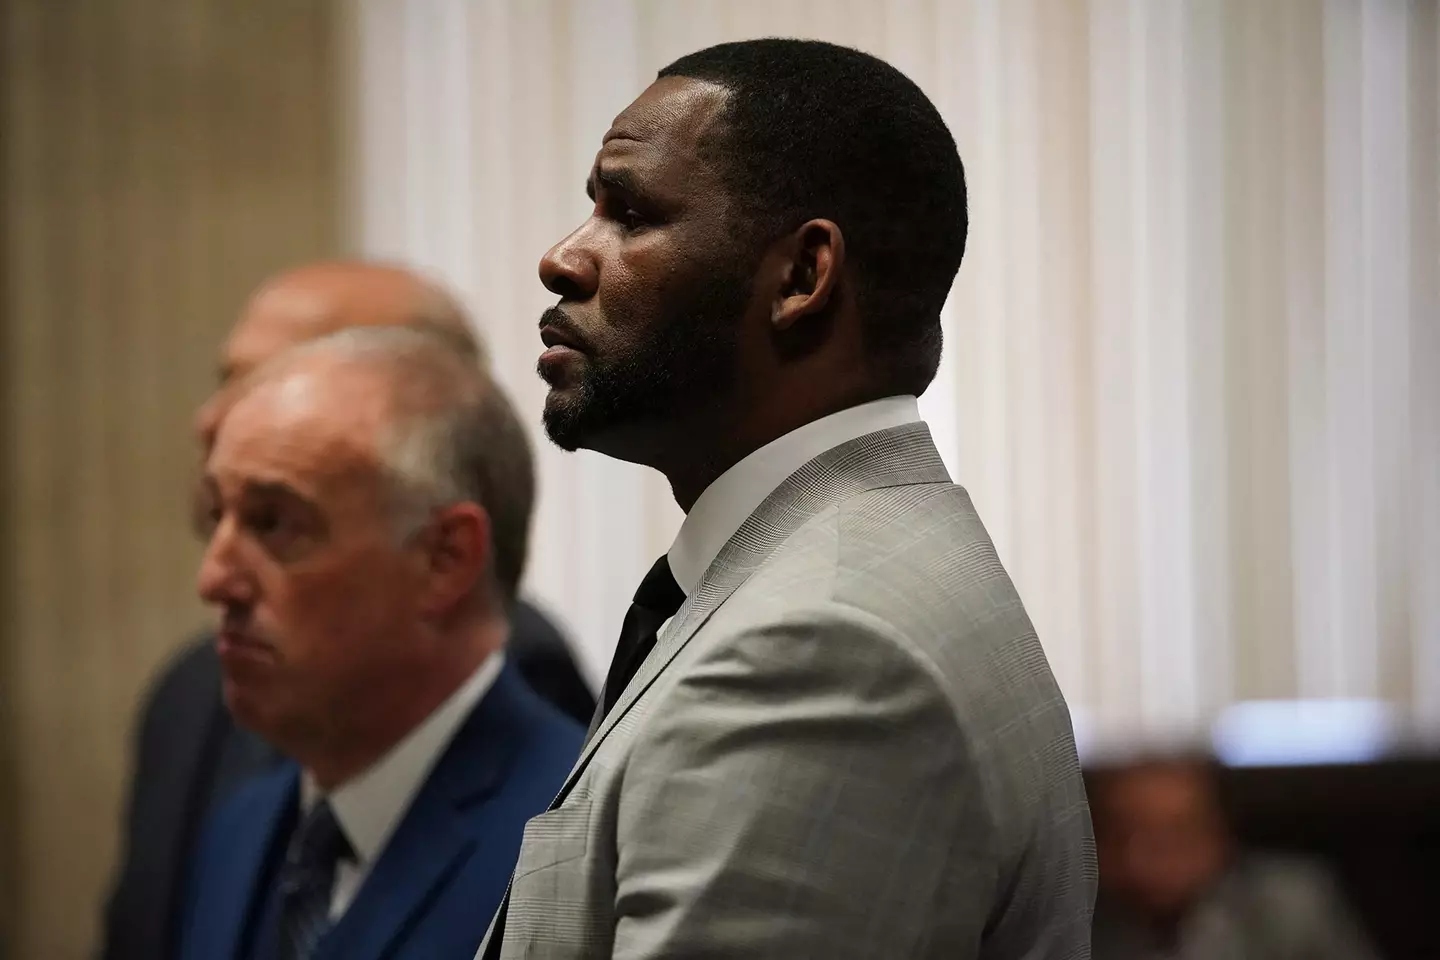 R Kelly has faced a number of shocking accusations (